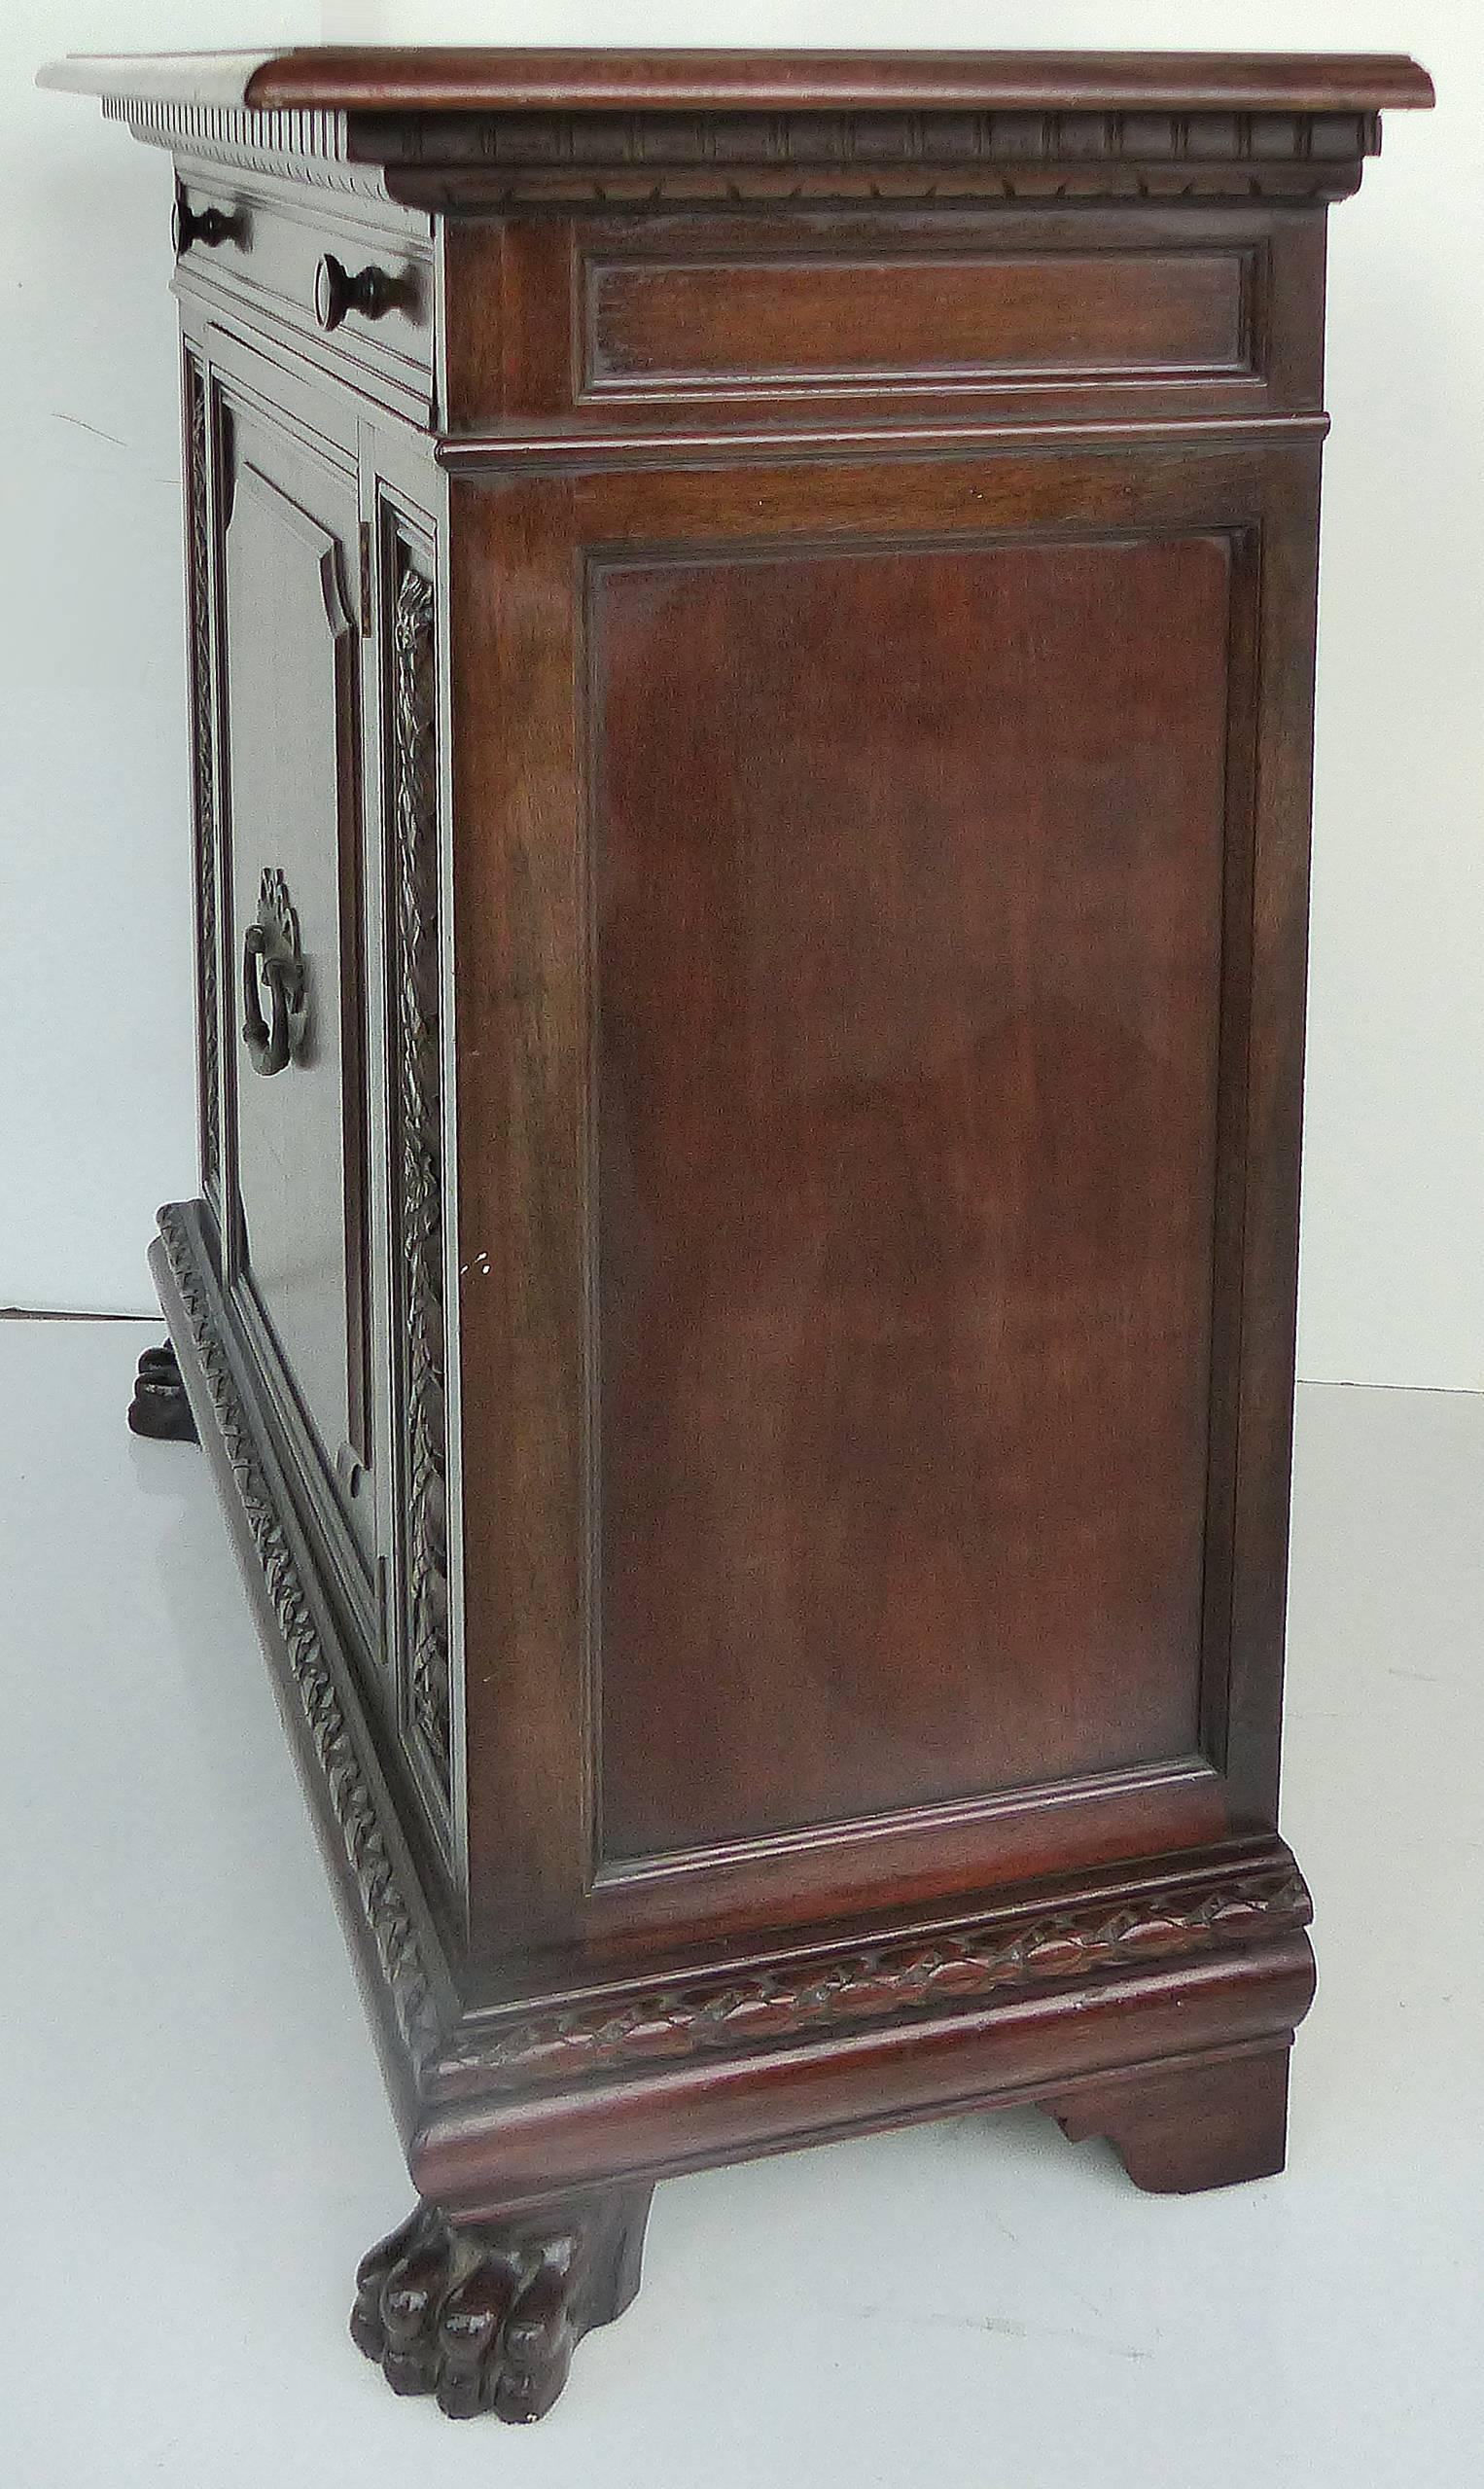 1930 S. Pagano carved lion paw traditional cabinet

An fine quality single door cabinet with large carved lion's paw feet by the cabinetmaker S. Pagano. The cabinet has a single slender drawer above the single door below. That door reveals ample